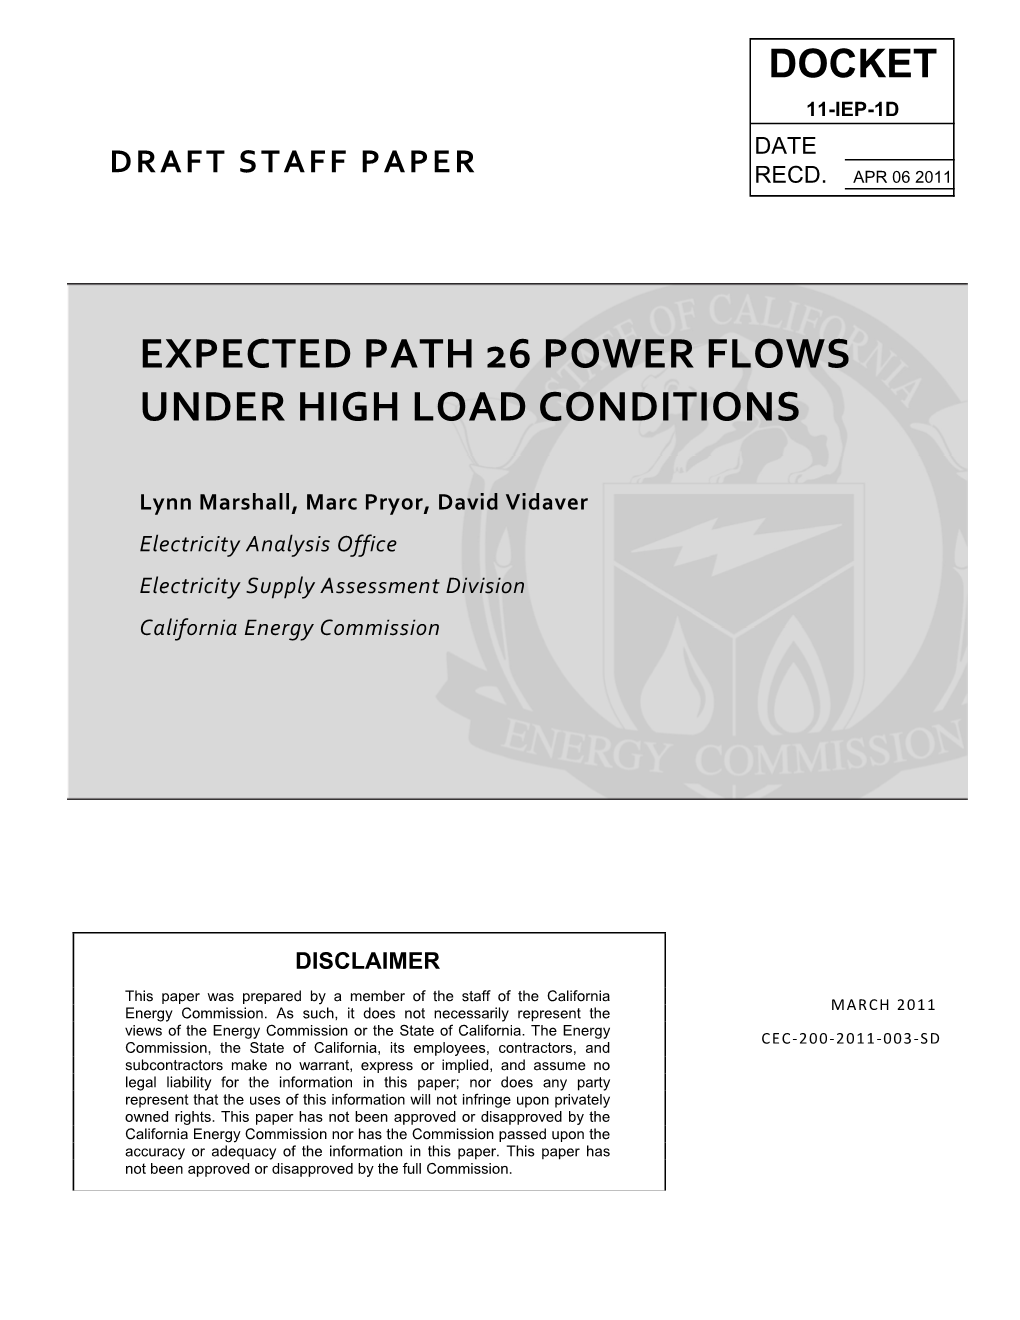 Expected Path 26 Power Flows Under High Load Conditions